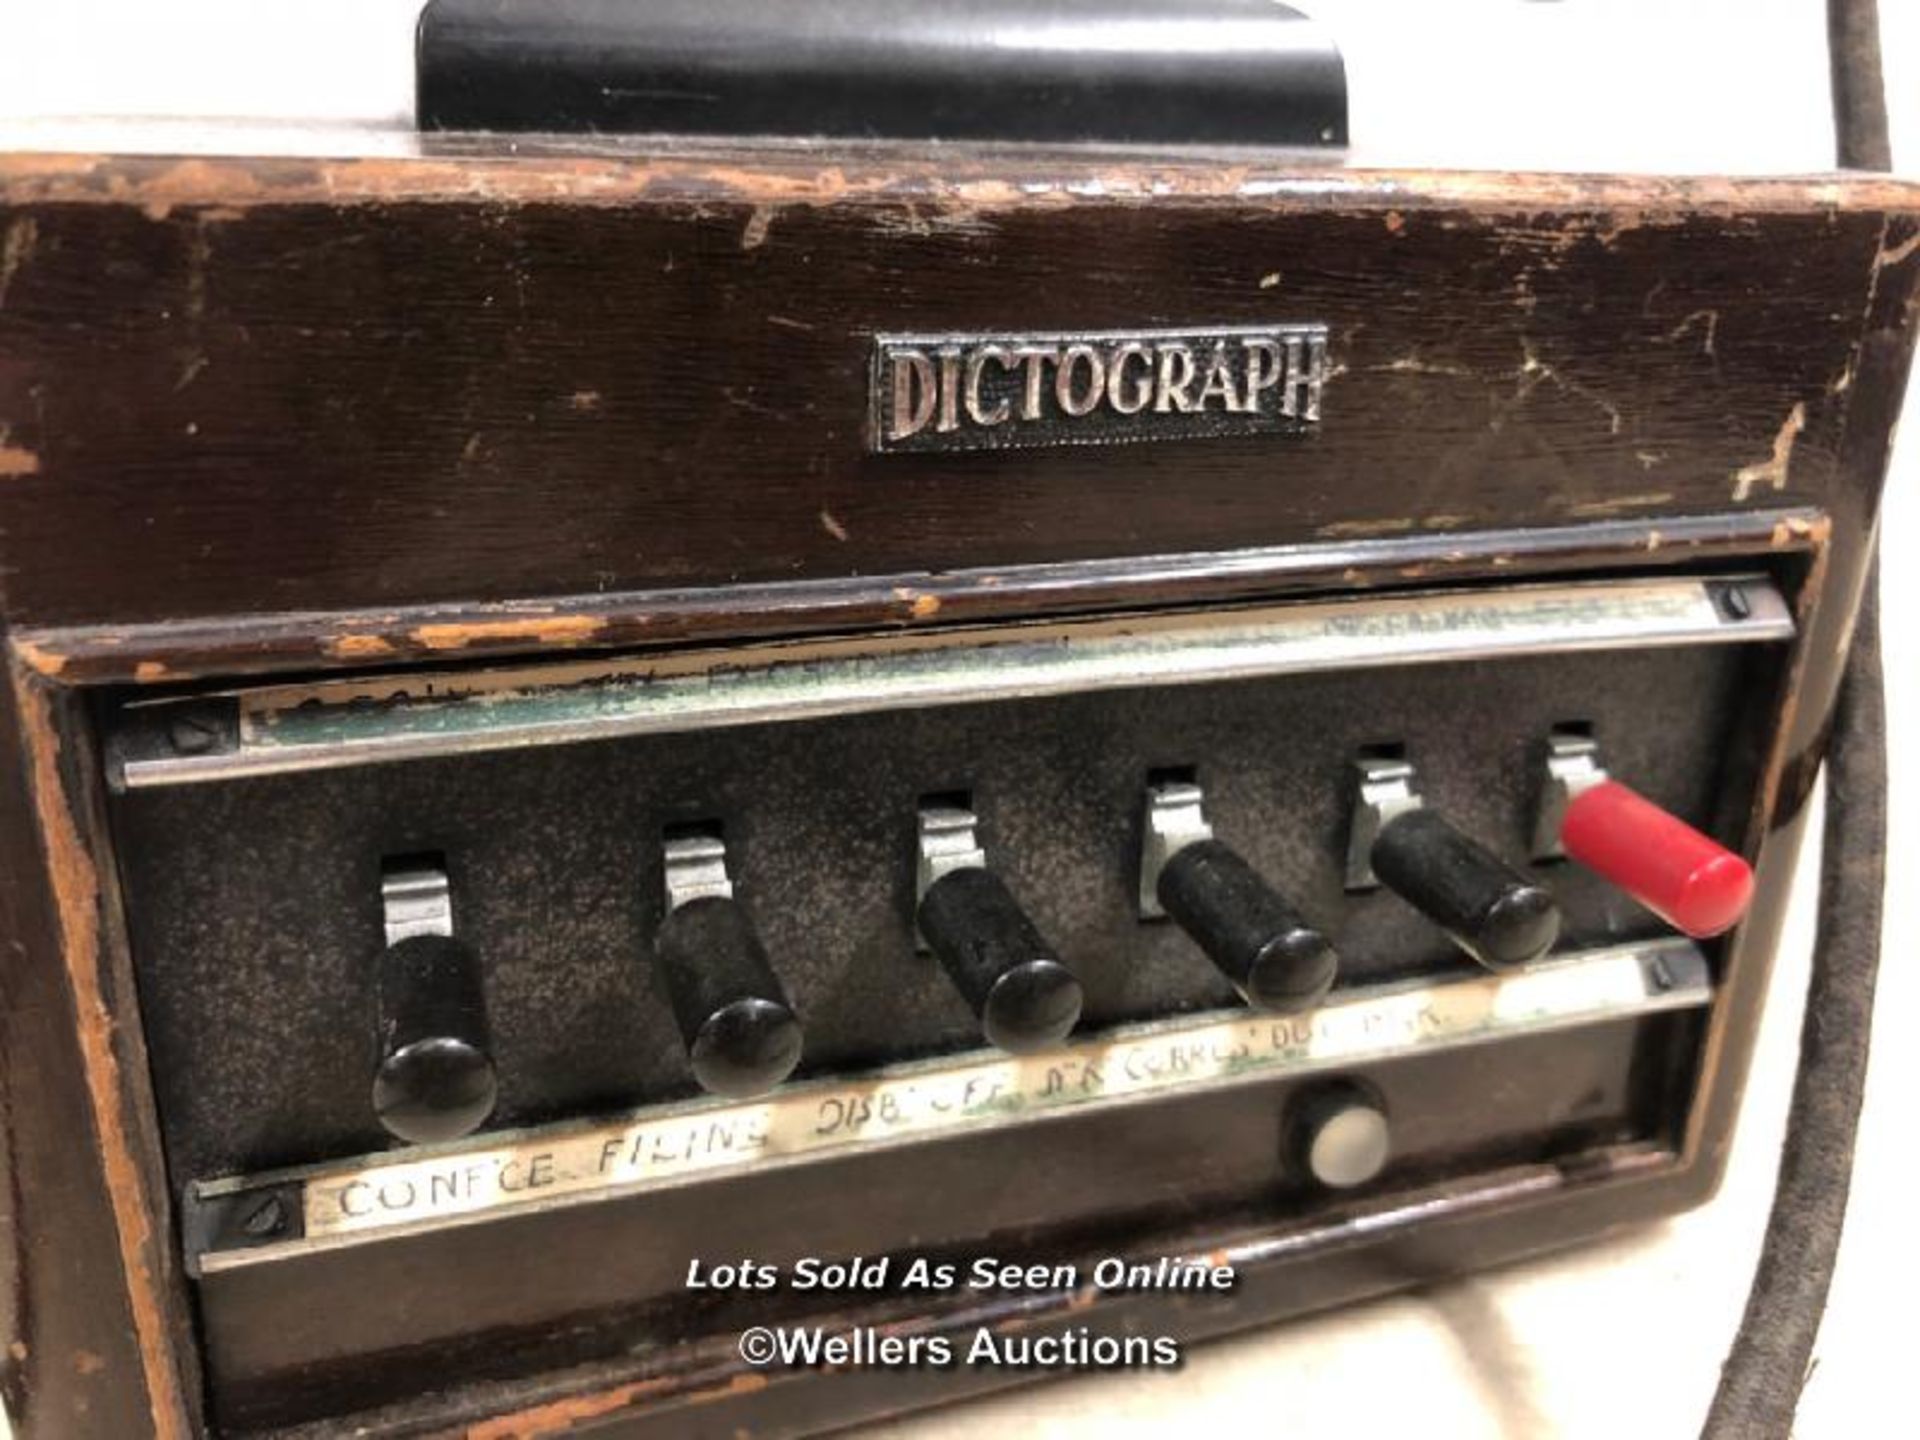 VINTAGE DICTOGRAPH TELEPHONE - Image 2 of 7